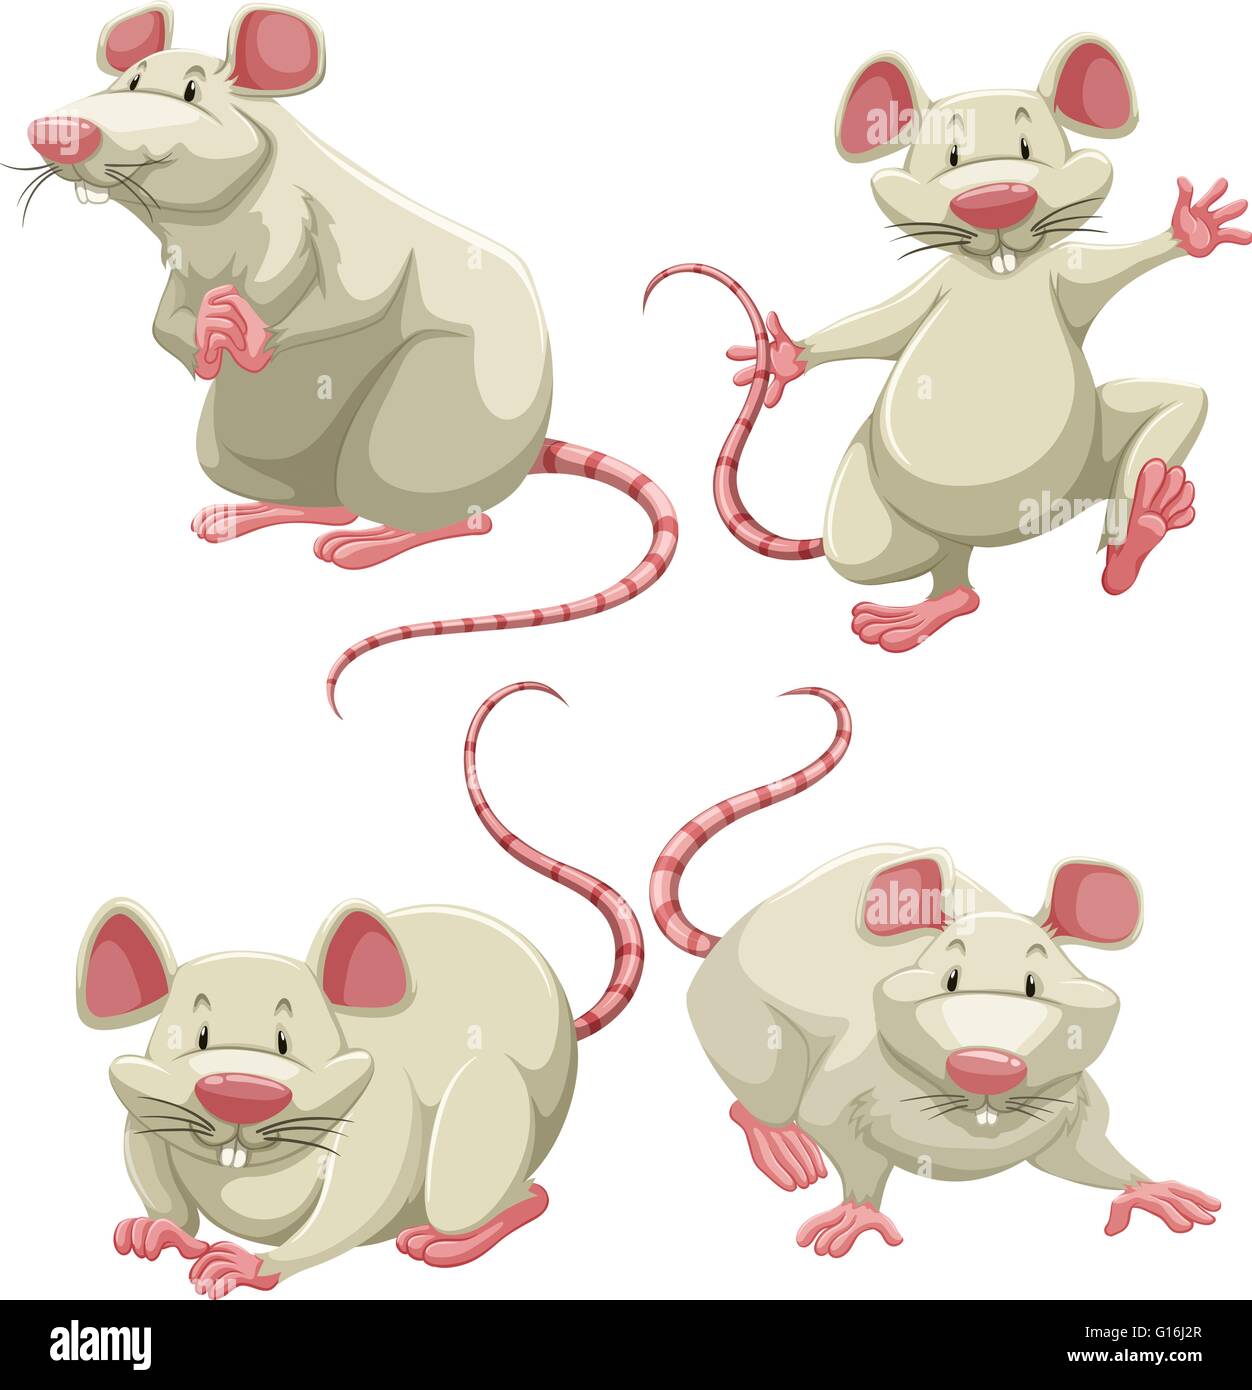 Four white mice doing different actions on white background Stock Vector